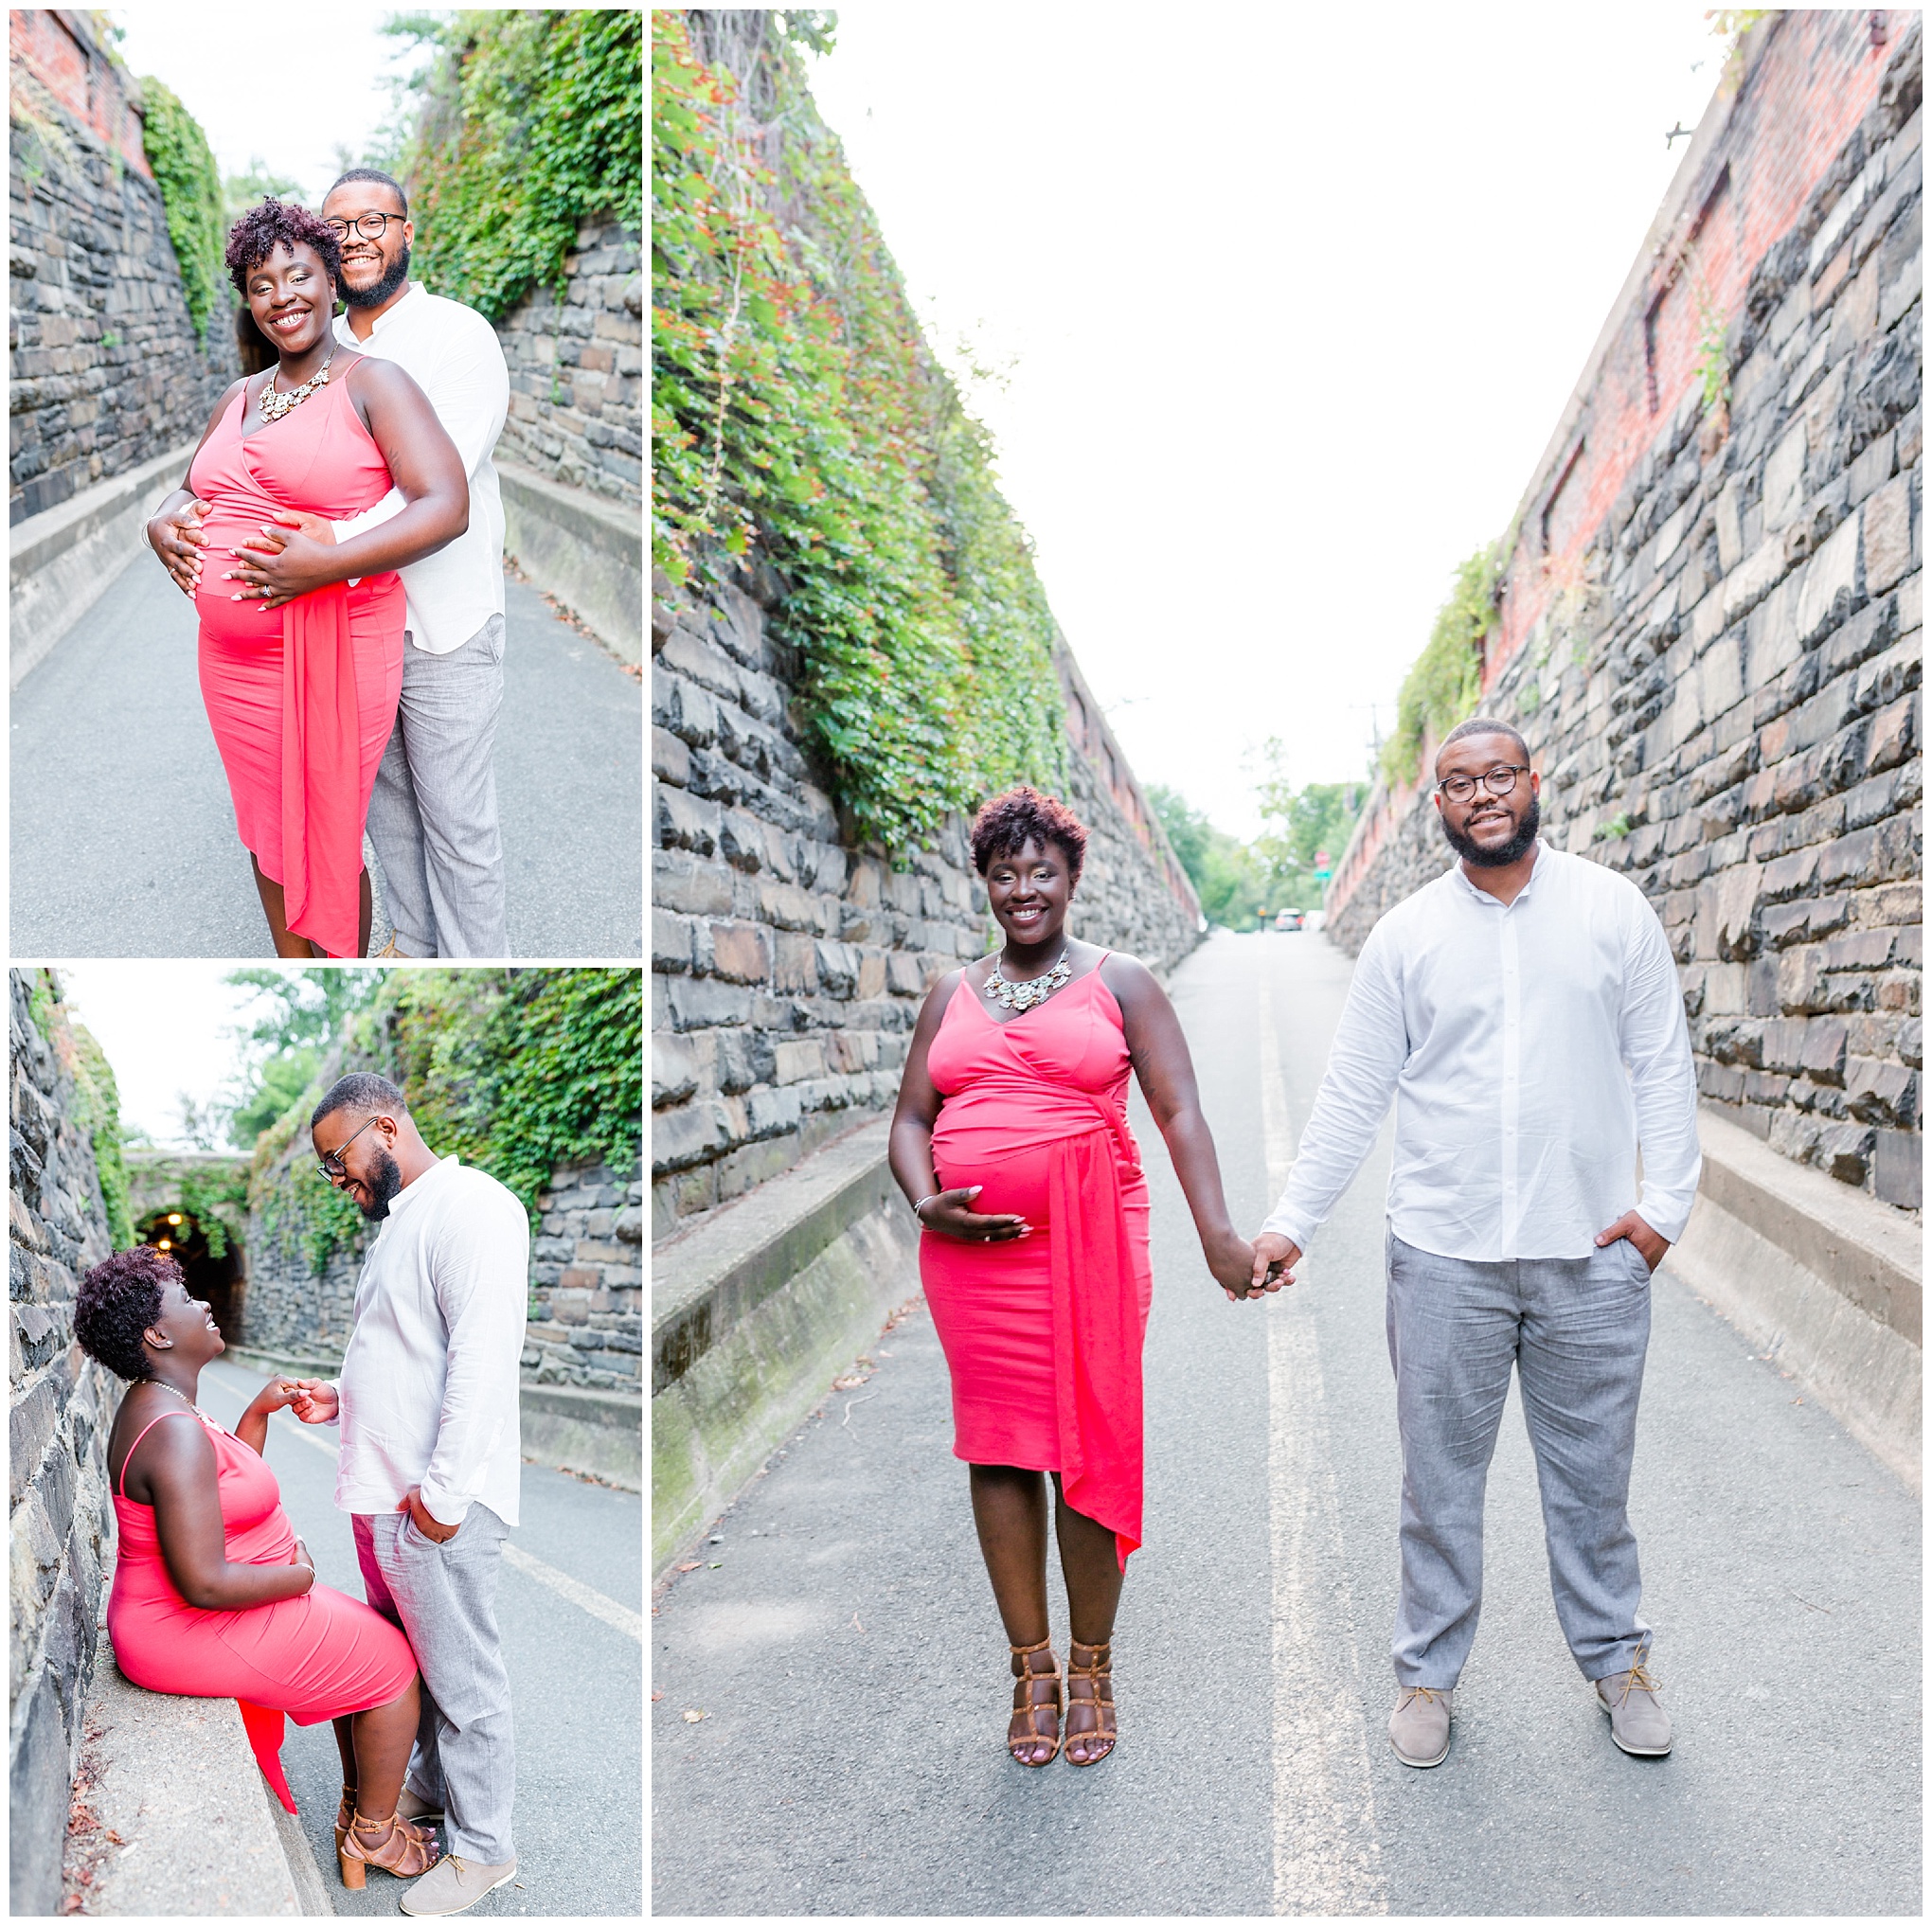 Wilkes Street Tunnel maternity photos, maternity style, coral dress, married couple, mom to be, dad to be, old town Alexandria, northern Virginia, maternity photographer, Alexandria maternity photographer, magic hour portraits, summer 2017